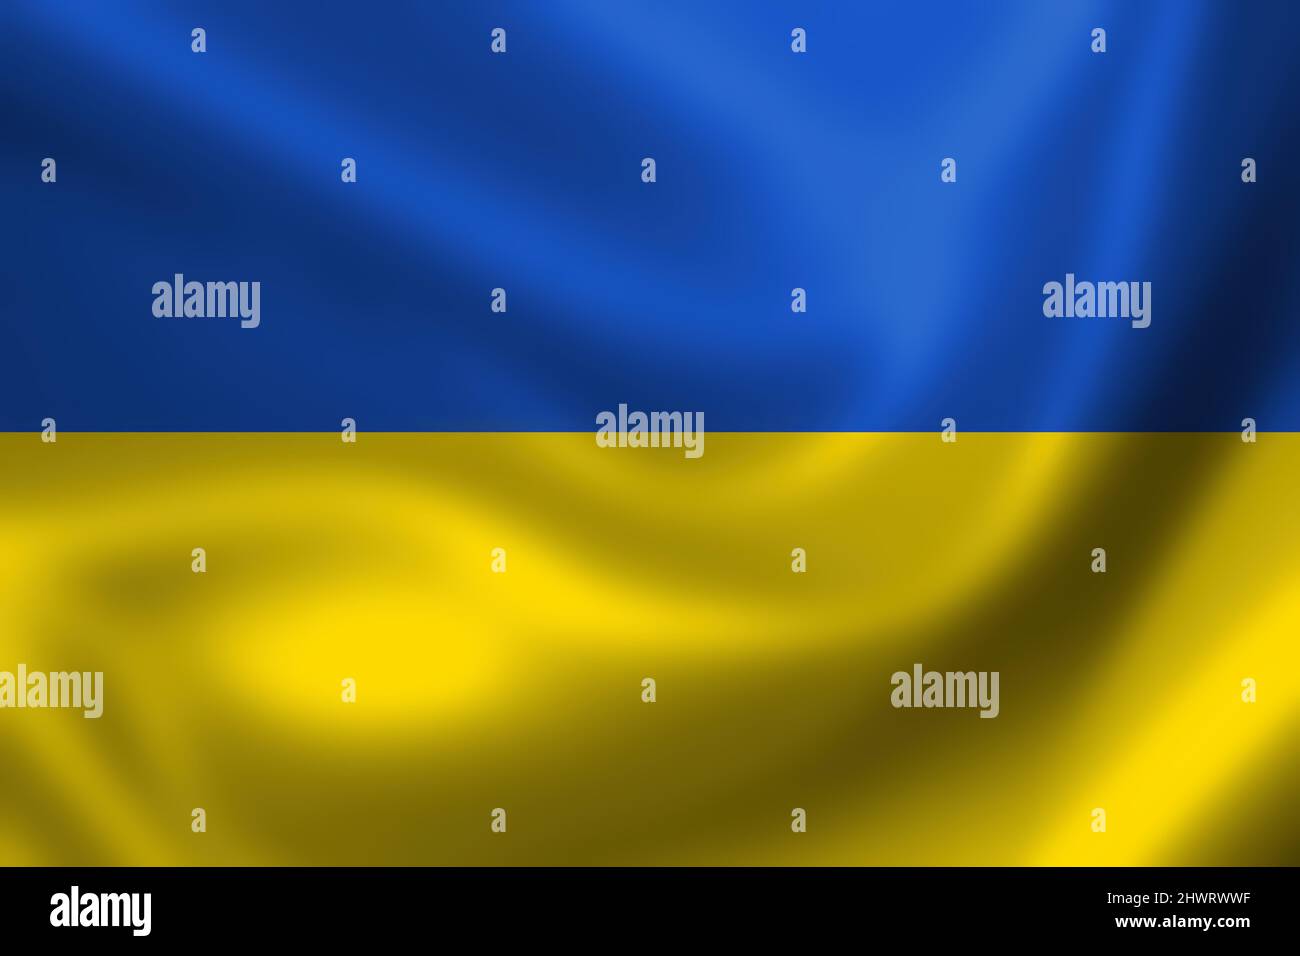 Illustration of the flag of Ukraine waving in the wind Stock Photo